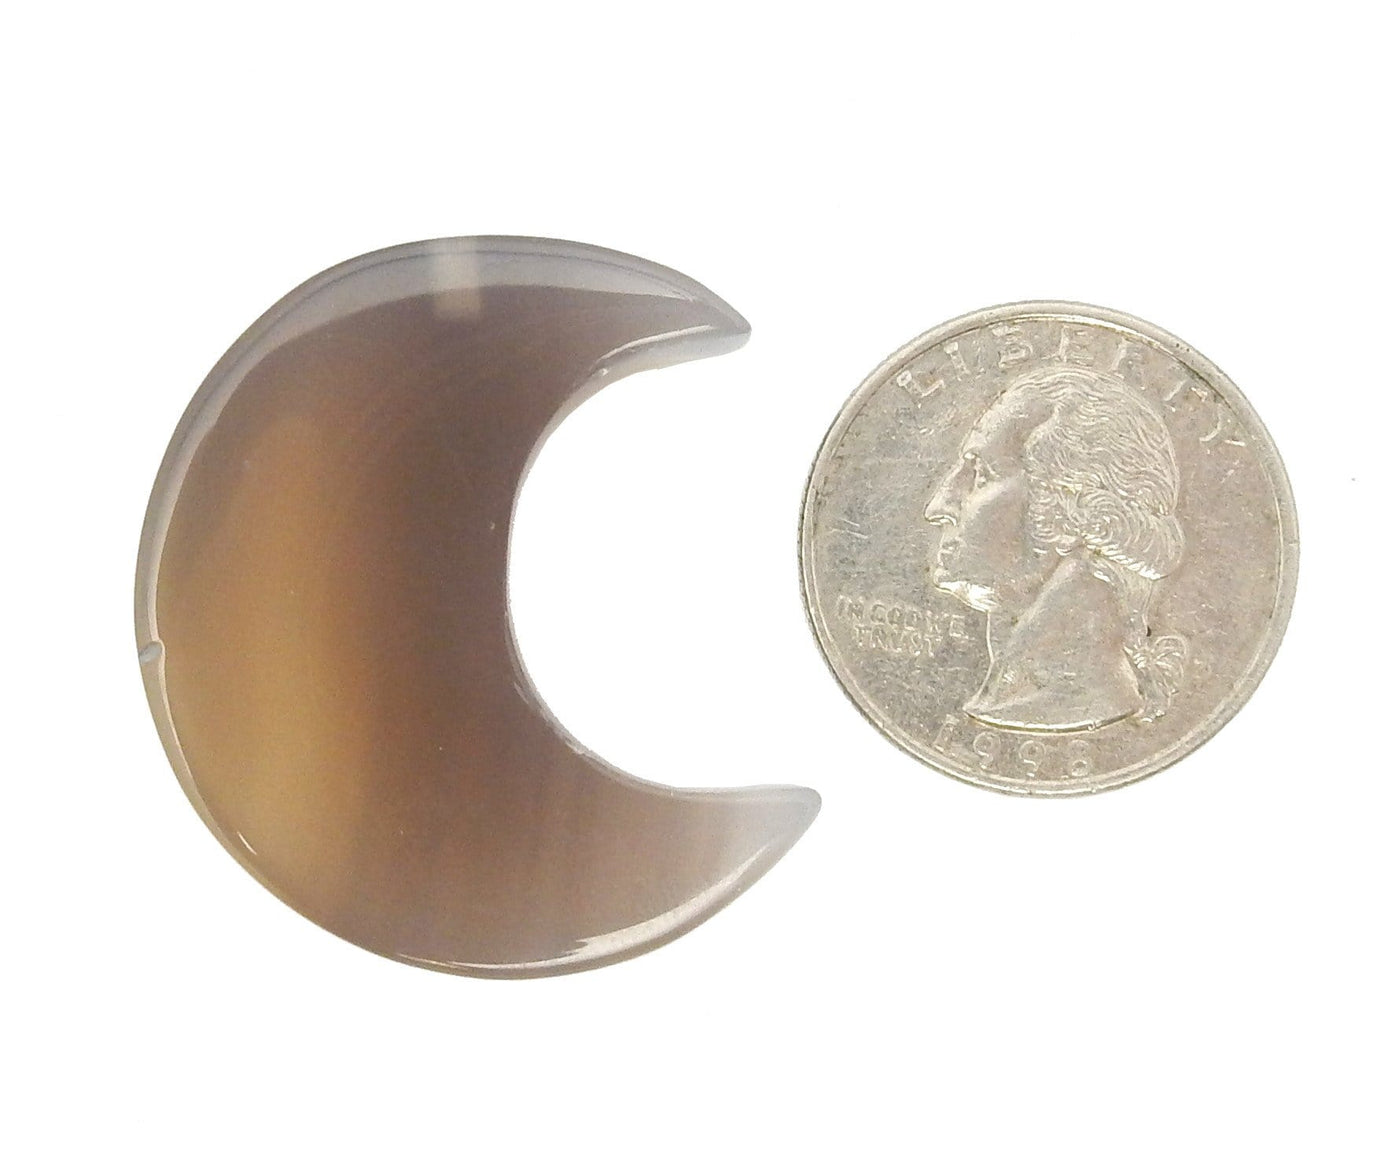 Chalcedony Half Crescent Moon - Drilled displayed next to a quarter for size reference.